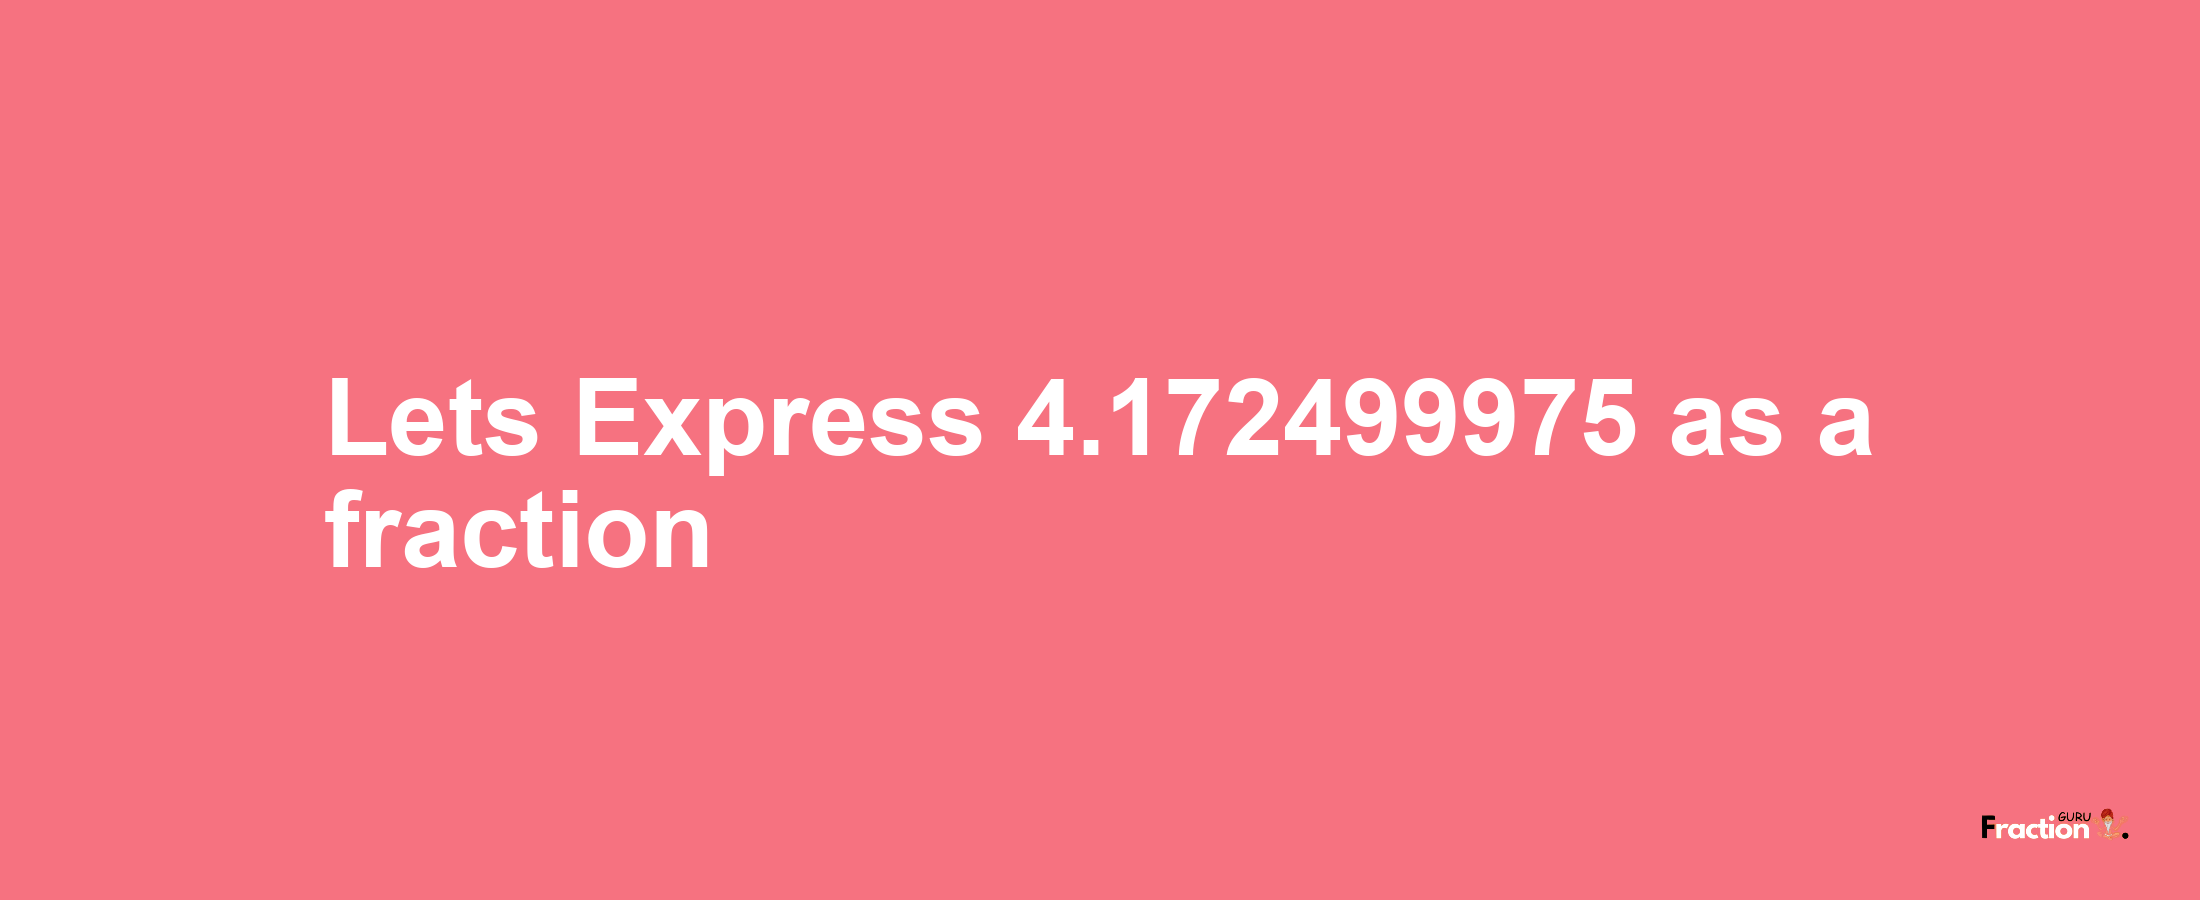 Lets Express 4.172499975 as afraction